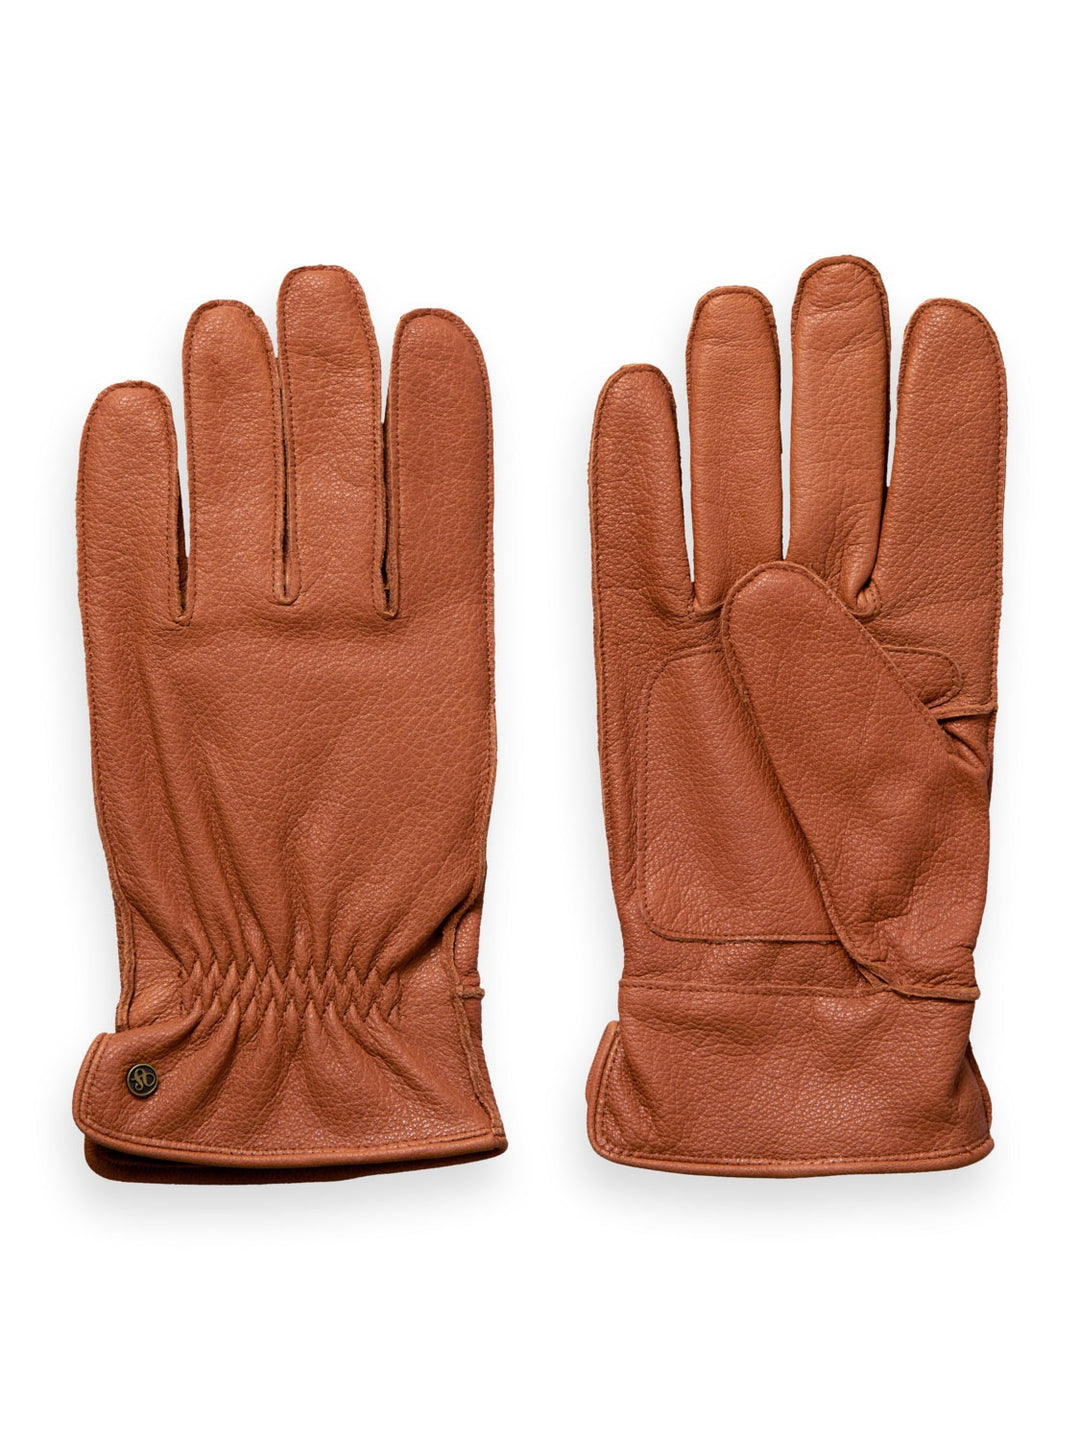 Scotch & Soda - Grain Leather Gloves in Toffee | Buster McGee